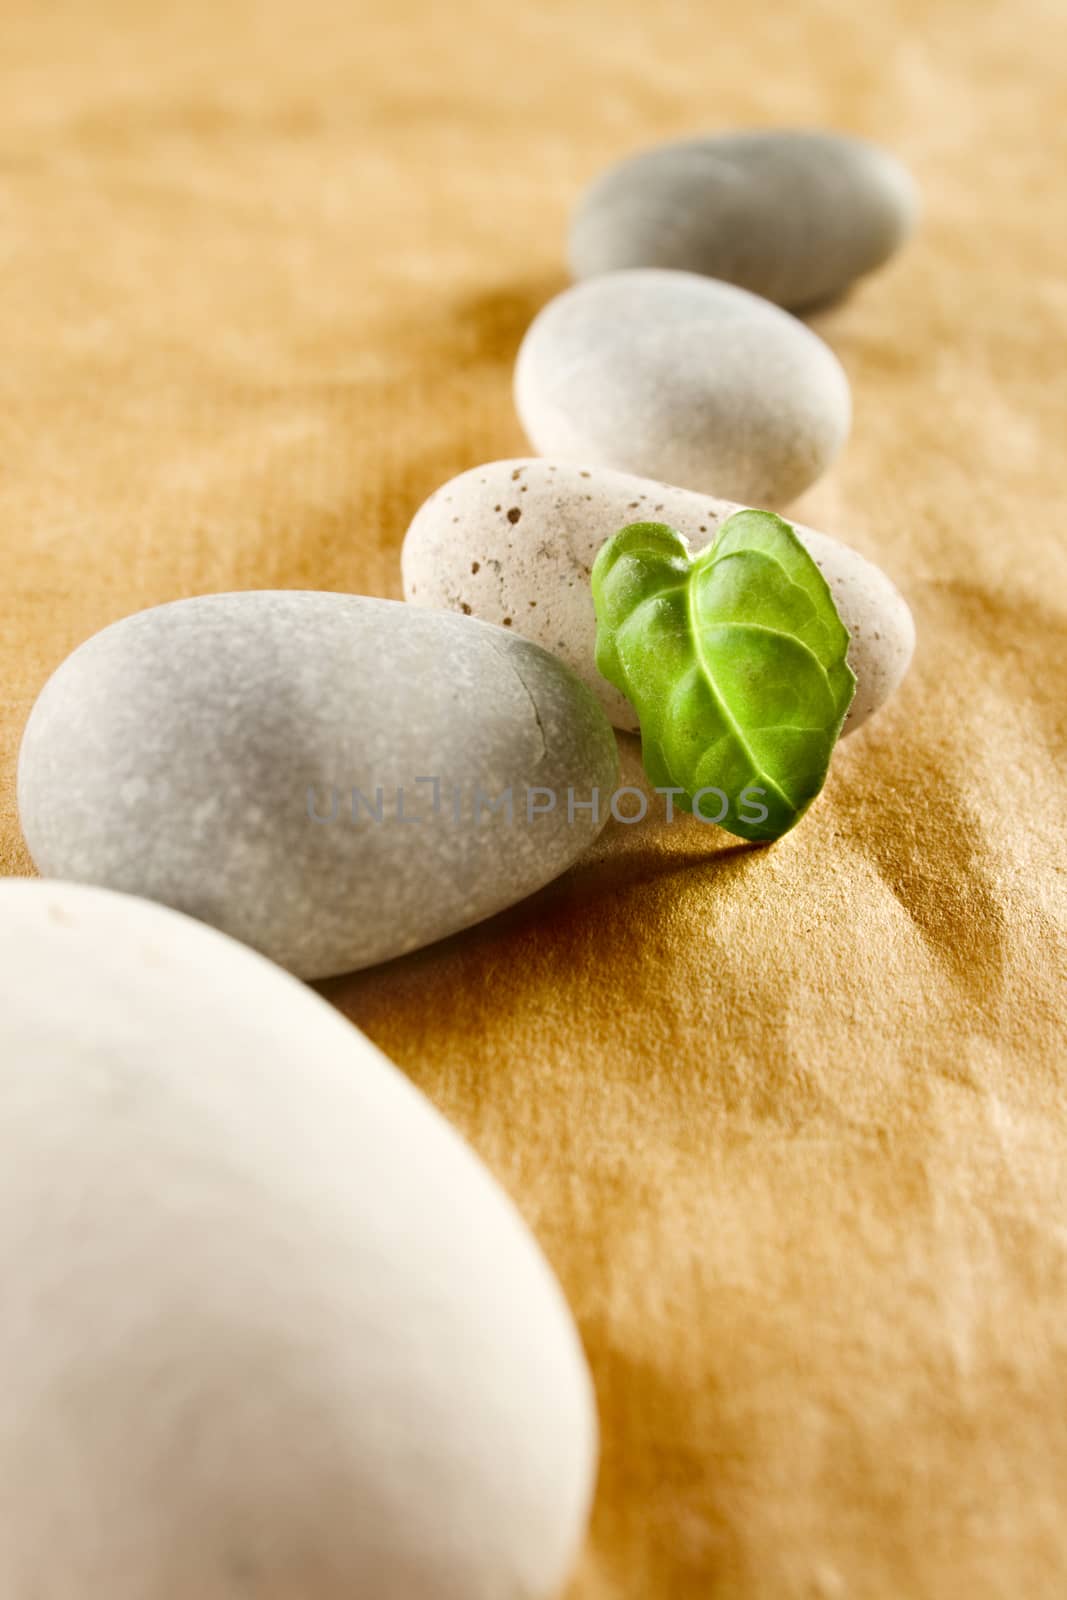 Stones and a green leaf